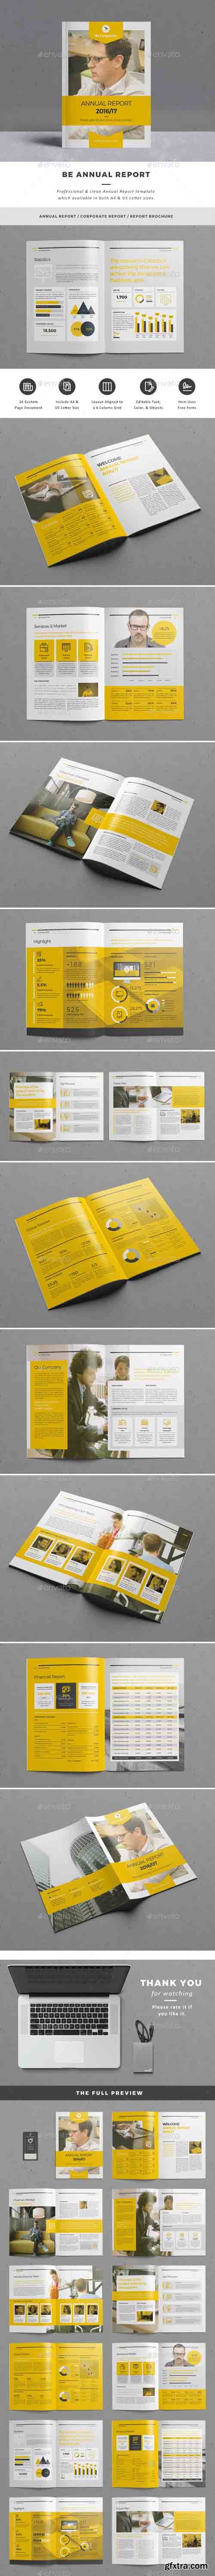 GR - Be Annual Report 15522022